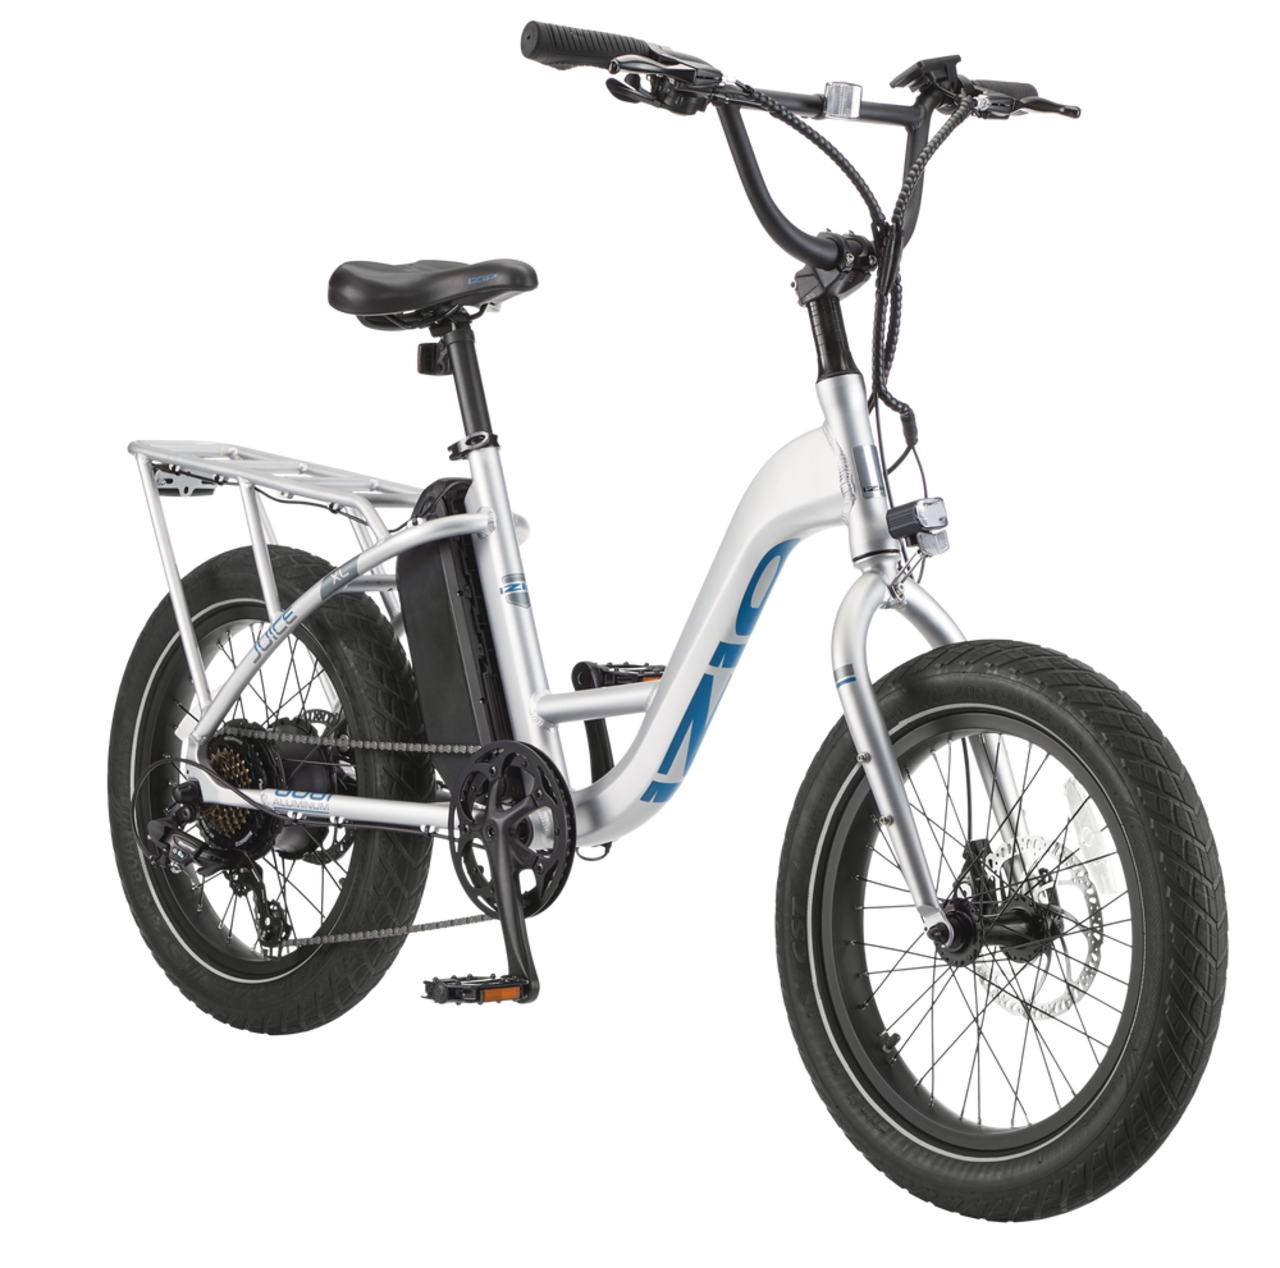 https://media-www.canadiantire.ca/product/playing/cycling/bicycles/0712068/izip-20-juice-xl-f307fc28-4f37-4bca-bfda-bf84d6d7f7d3.png?imdensity=1&imwidth=640&impolicy=mZoom